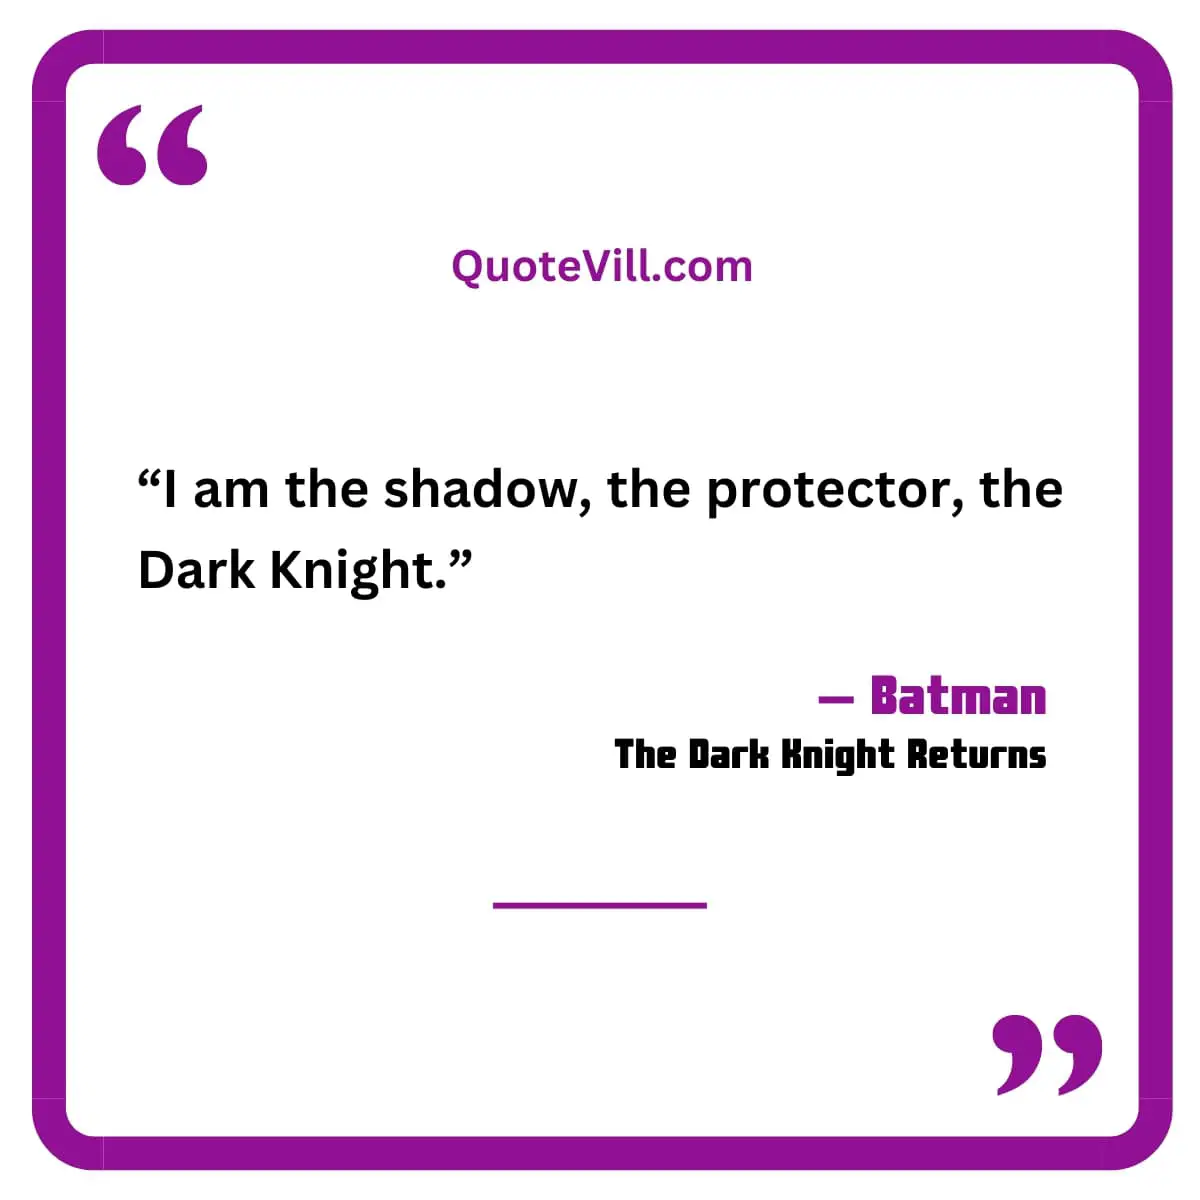 Batman Quotes on Darkness